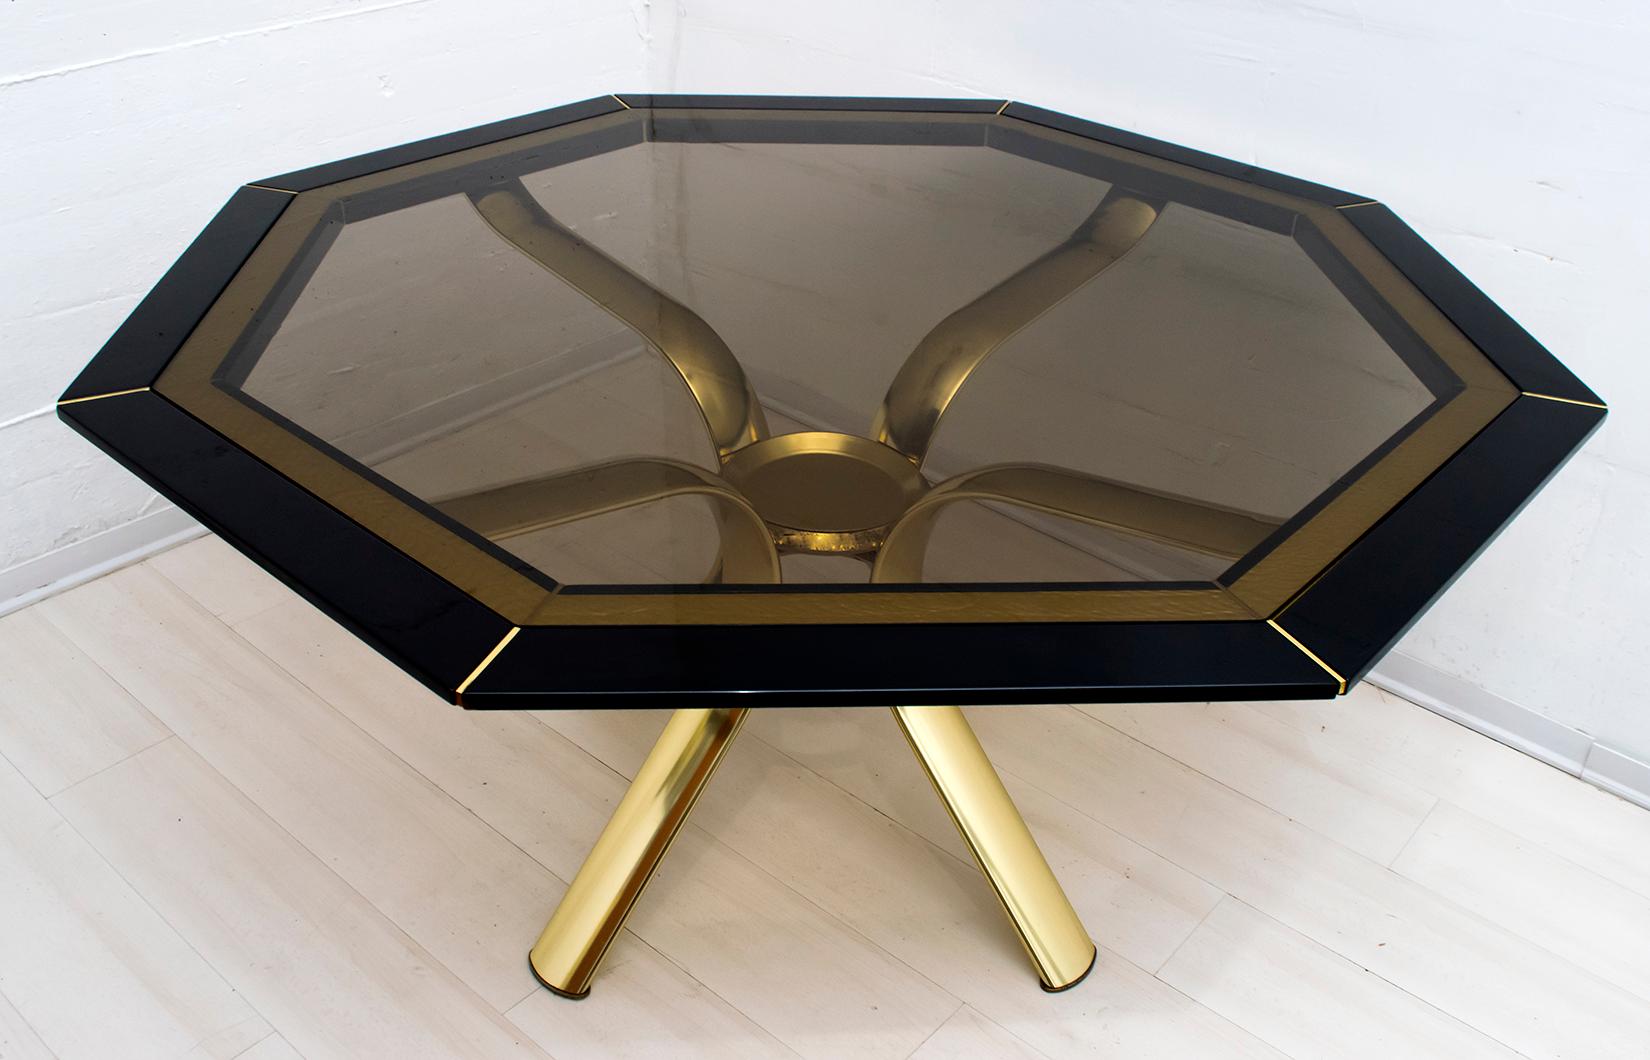 Pierre Cardin Octagonal Dining Table Black Lacquer with Brass Inserts and Base For Sale 4